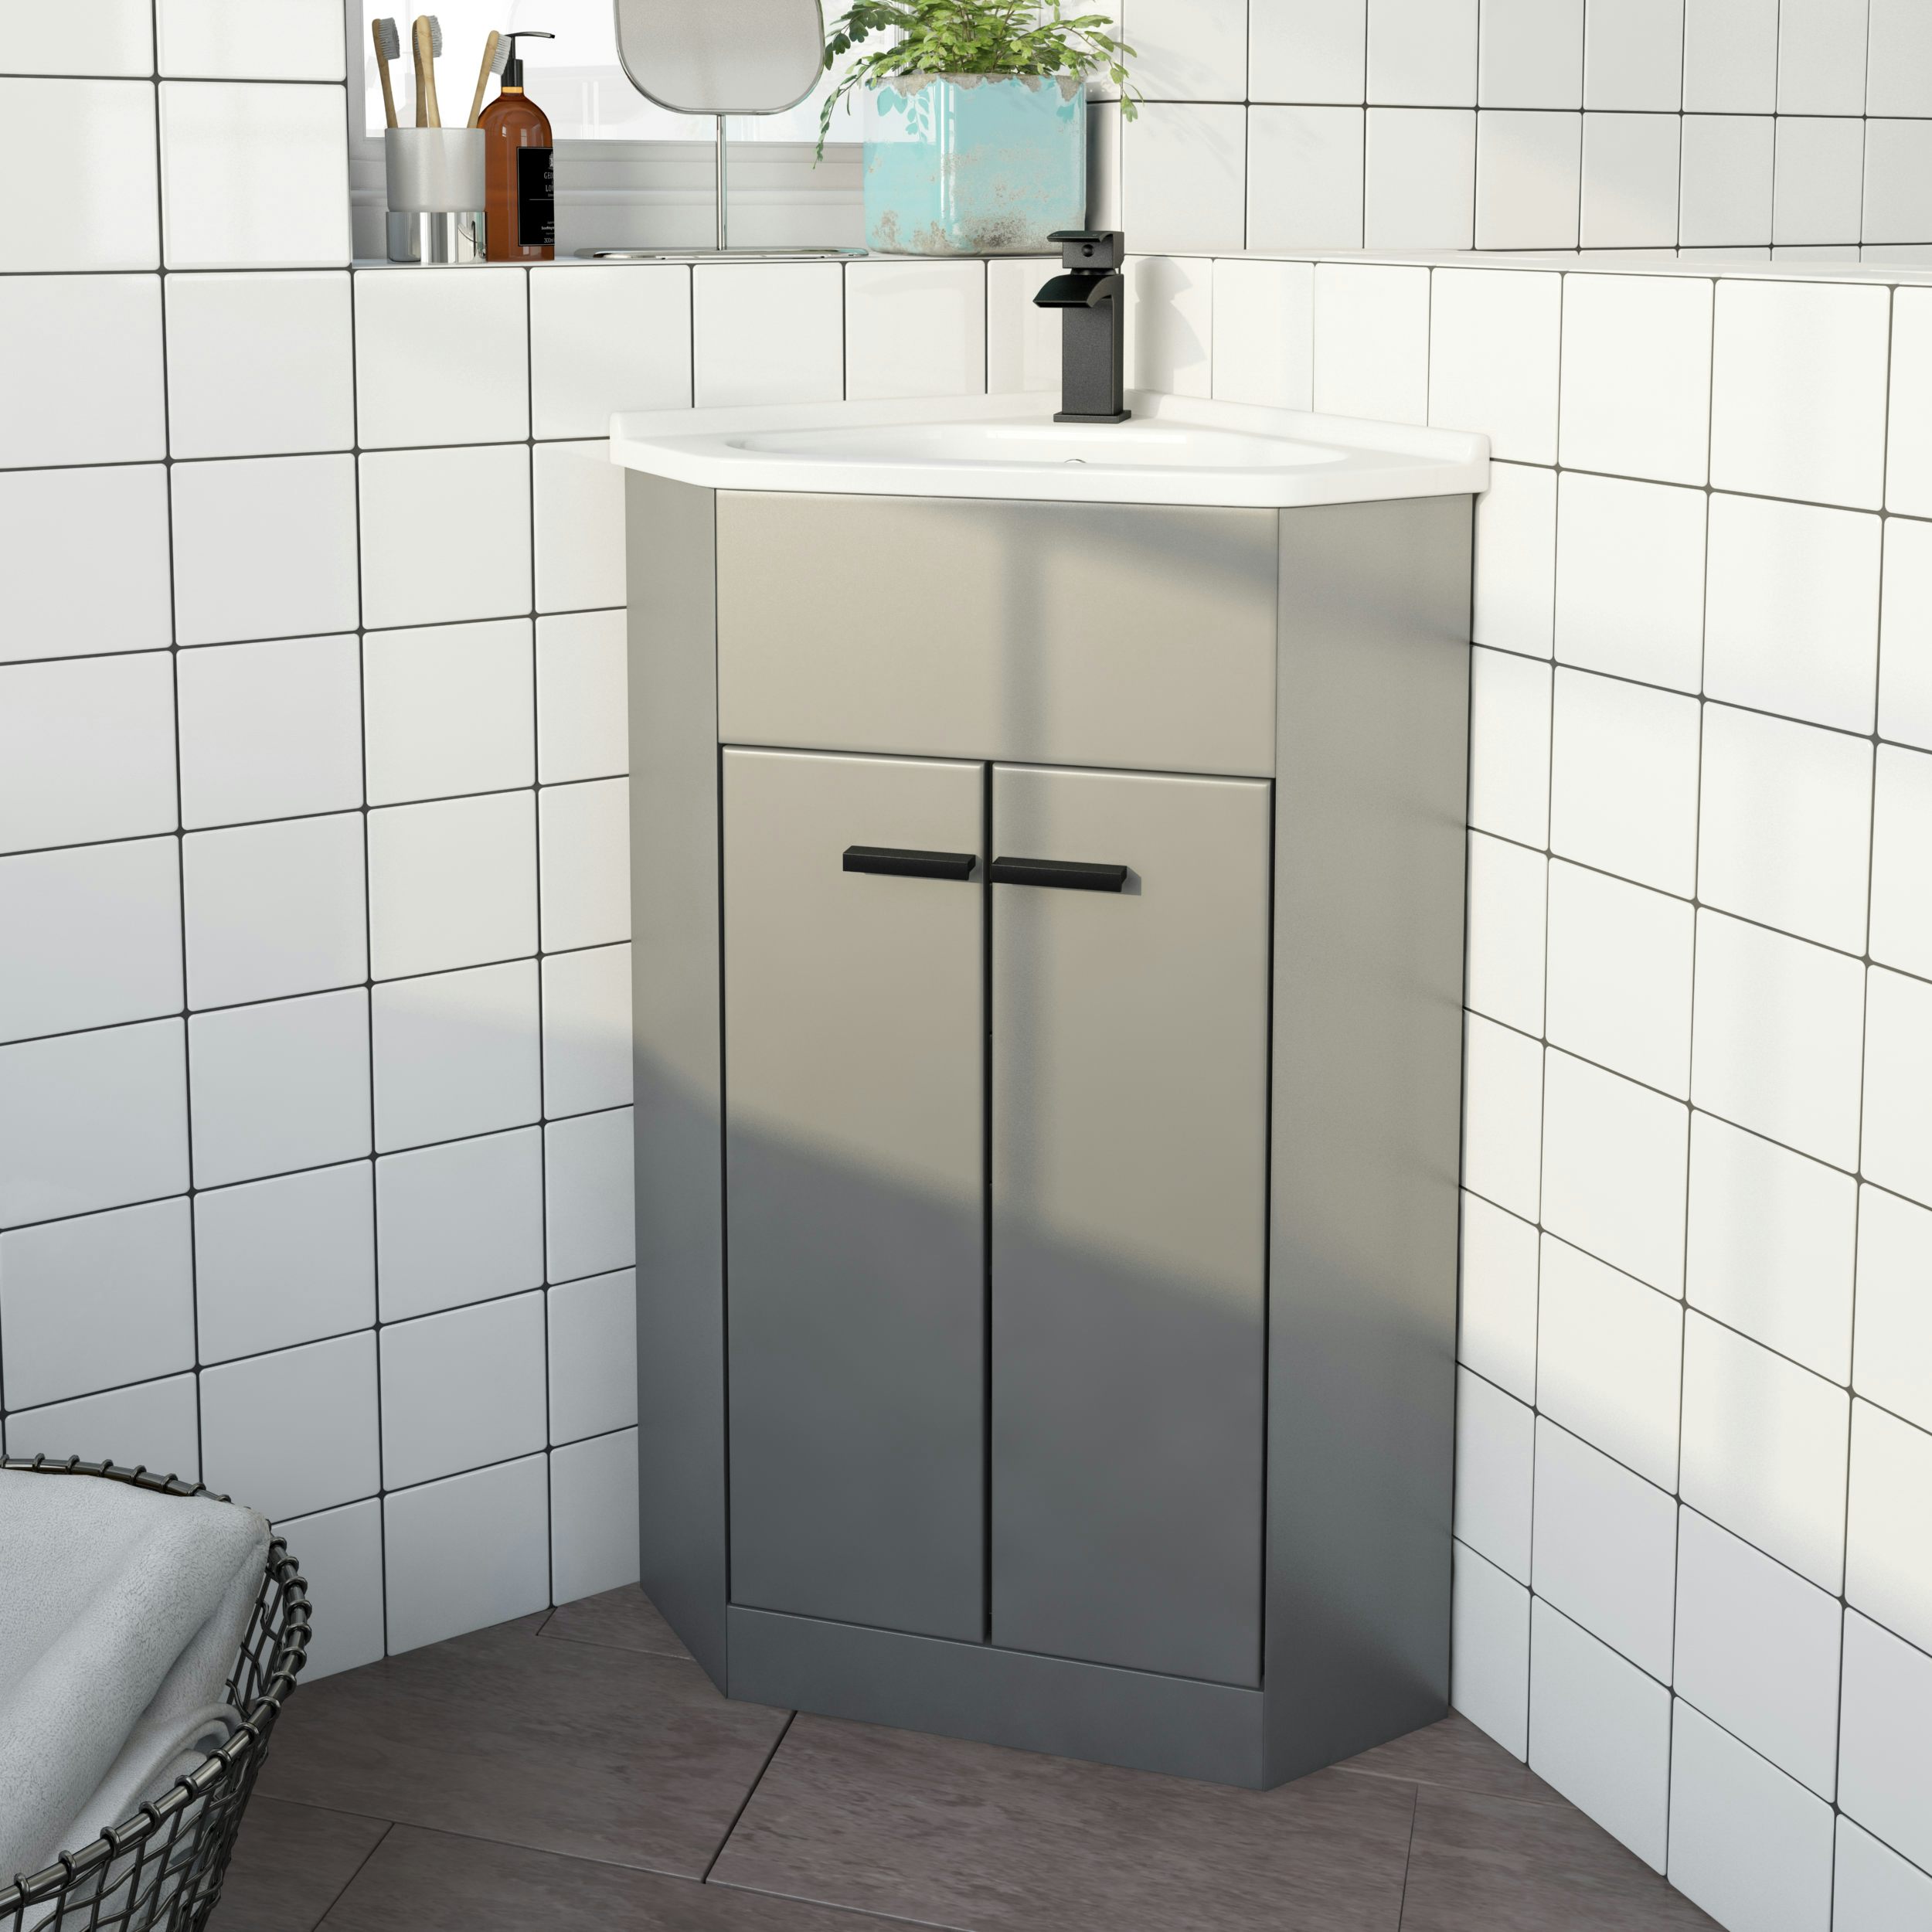 Clarity Compact satin grey corner floorstanding vanity unit and ceramic basin 580mm with tap and black handles